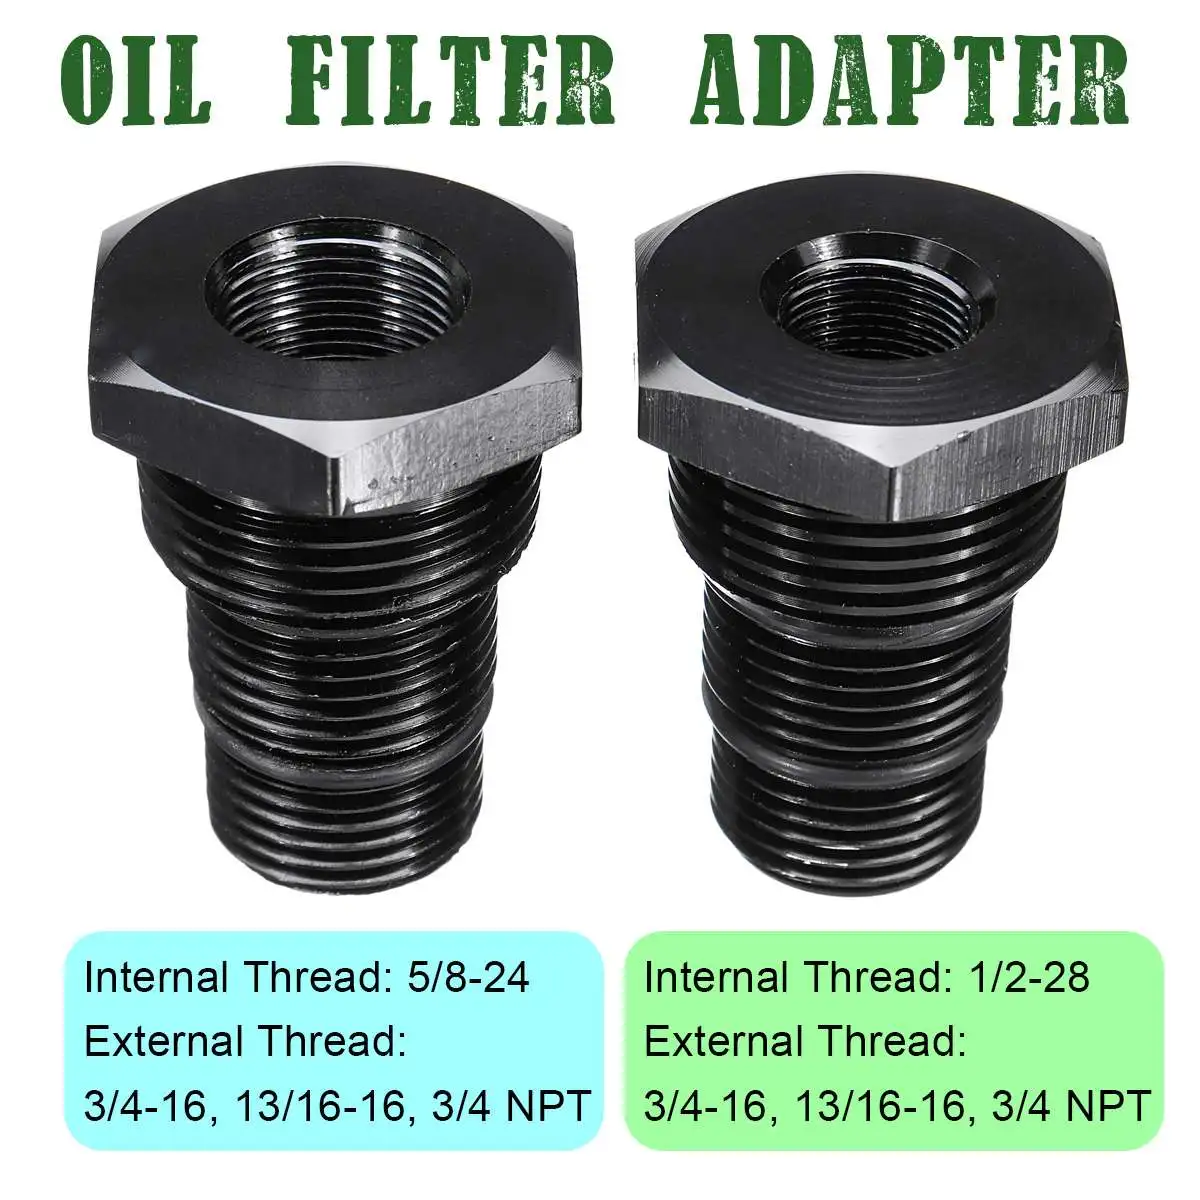 3x Car Oil Filter Threaded Adapter 5/8-24 to 3/4-16 13/16-16 3/4 NPT N5824T34-3 